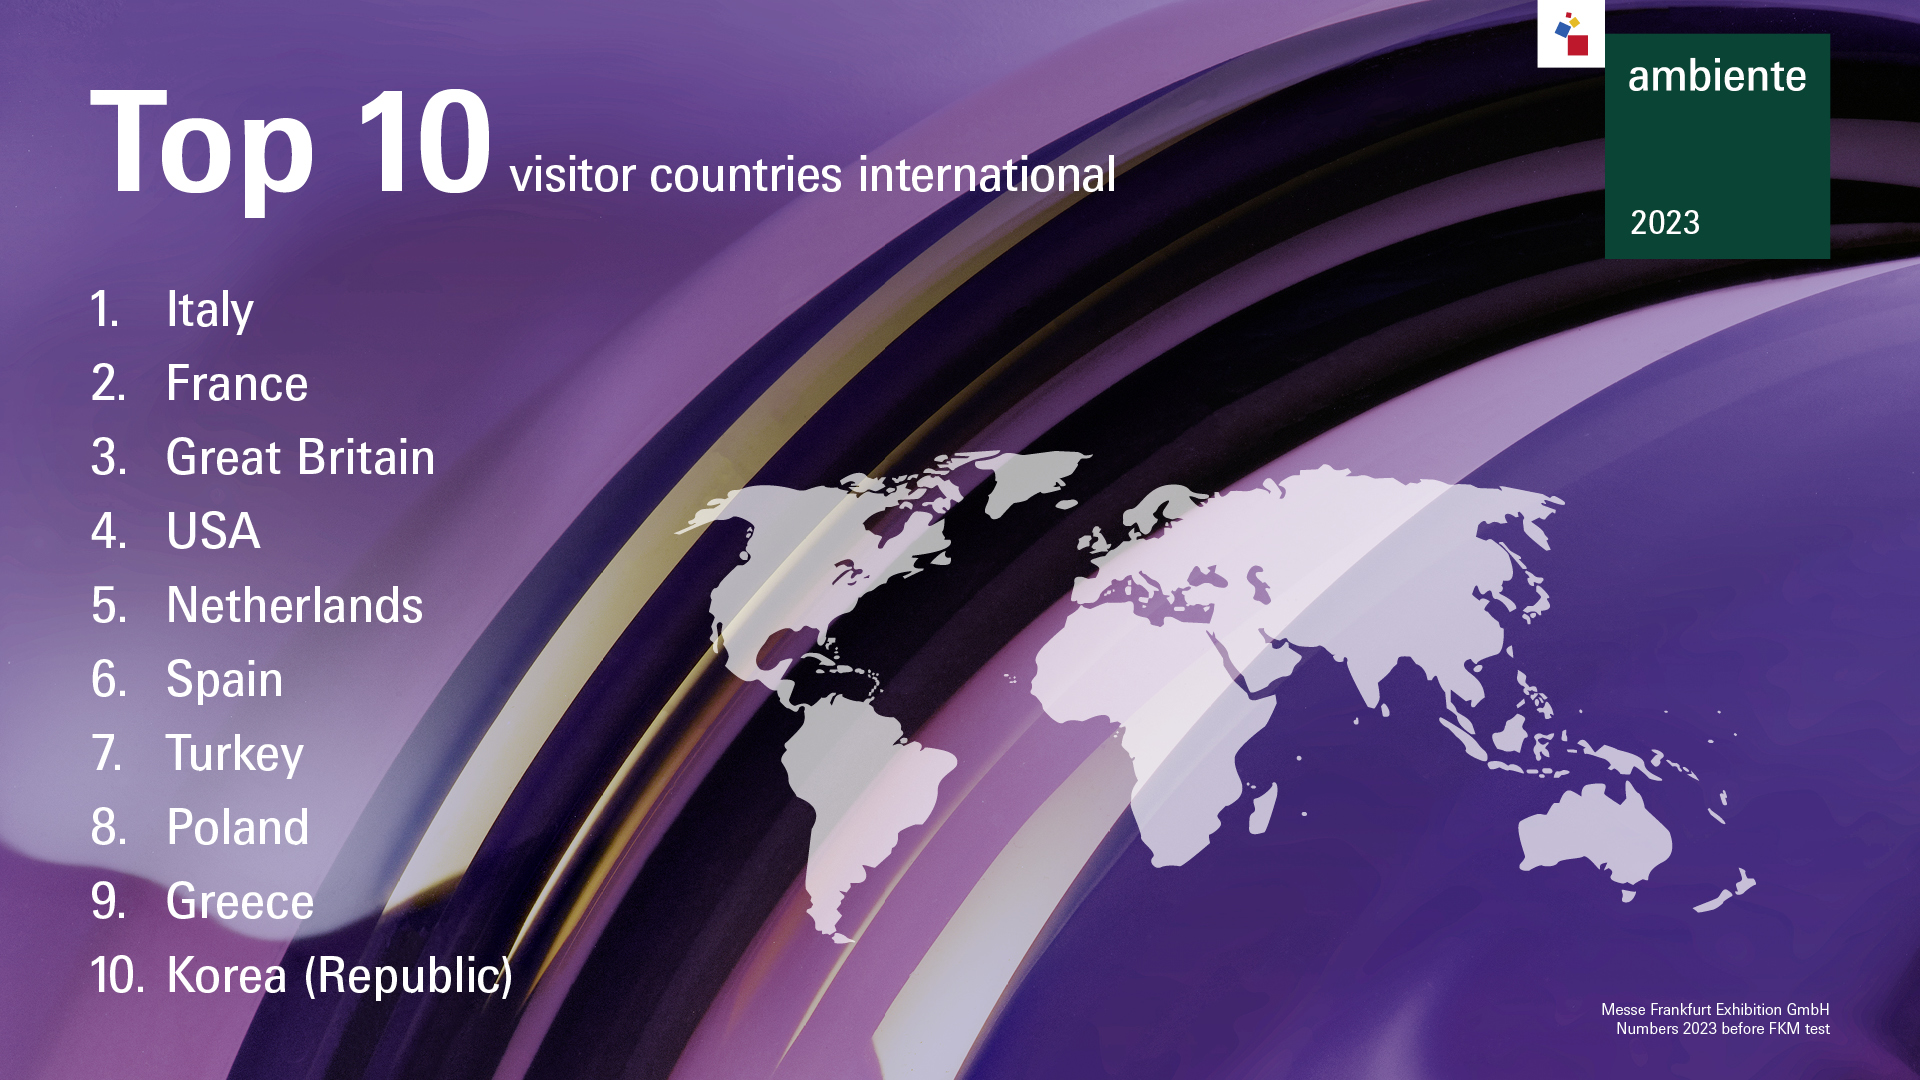 Ambiente 2023: top 10 visitor countries international